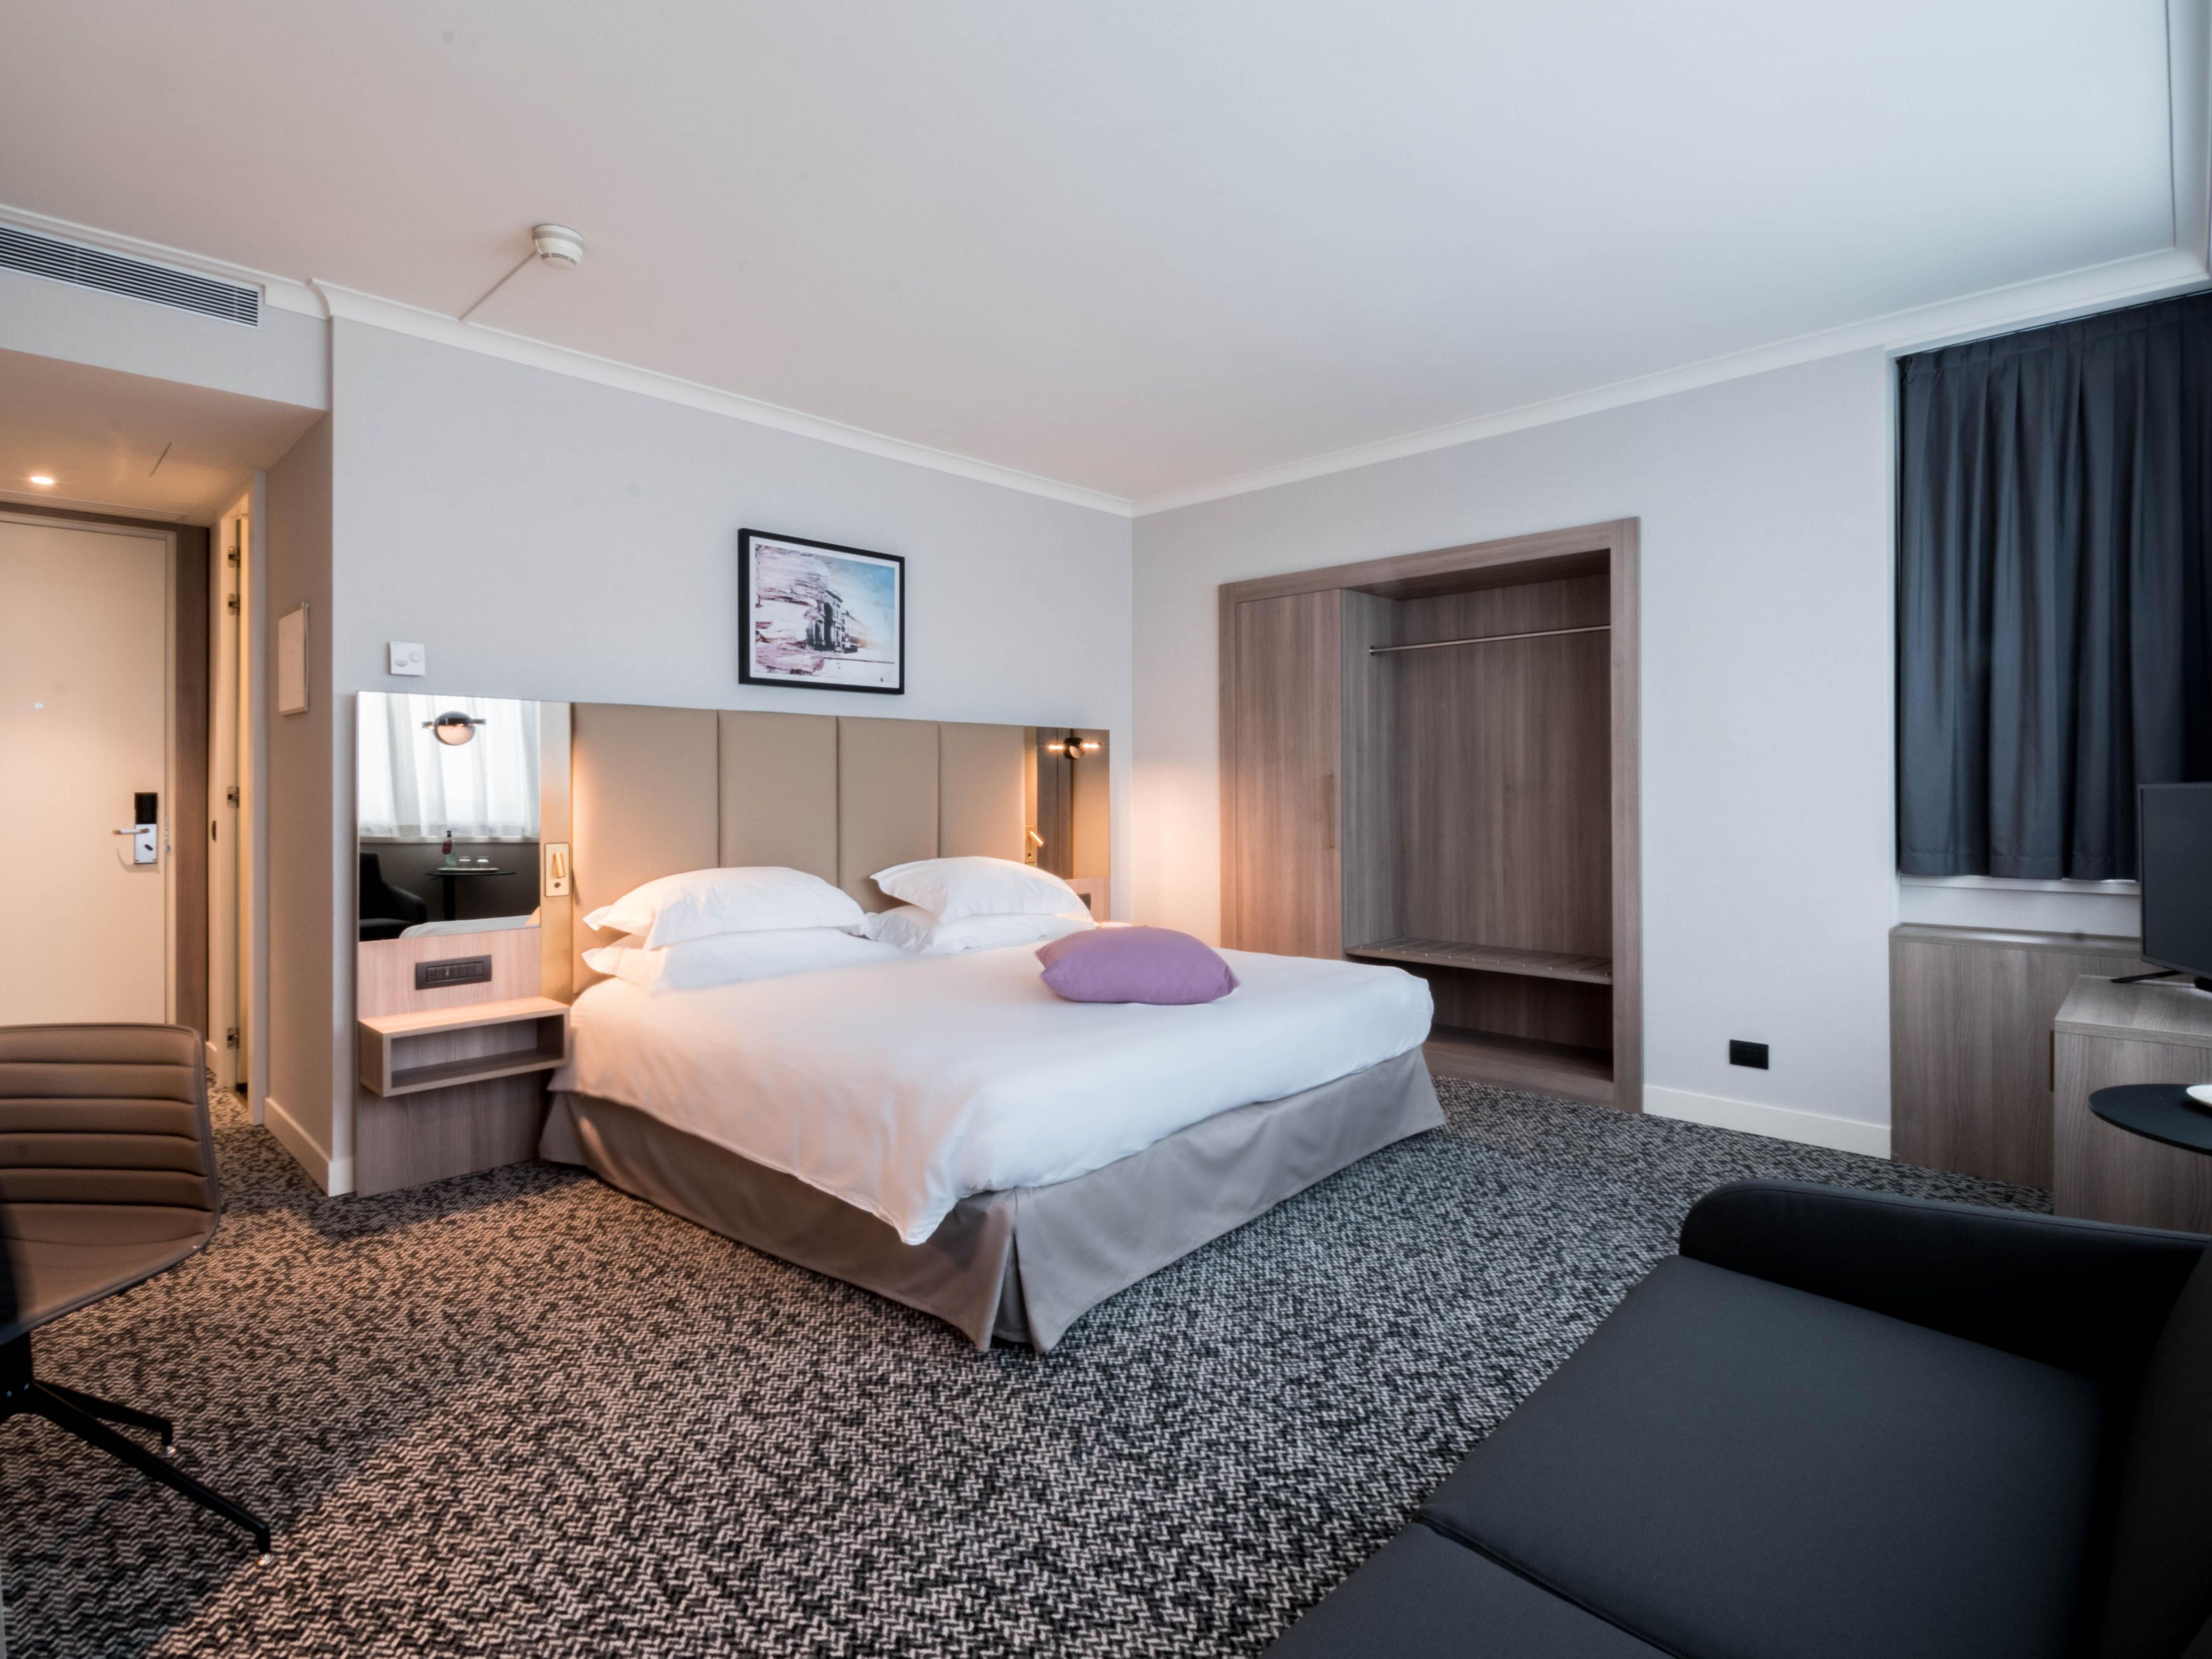 Bring your loved ones when travelling and enjoy the comfort of the family rooms. Great space at an affordable rate for up to two adults and two children.